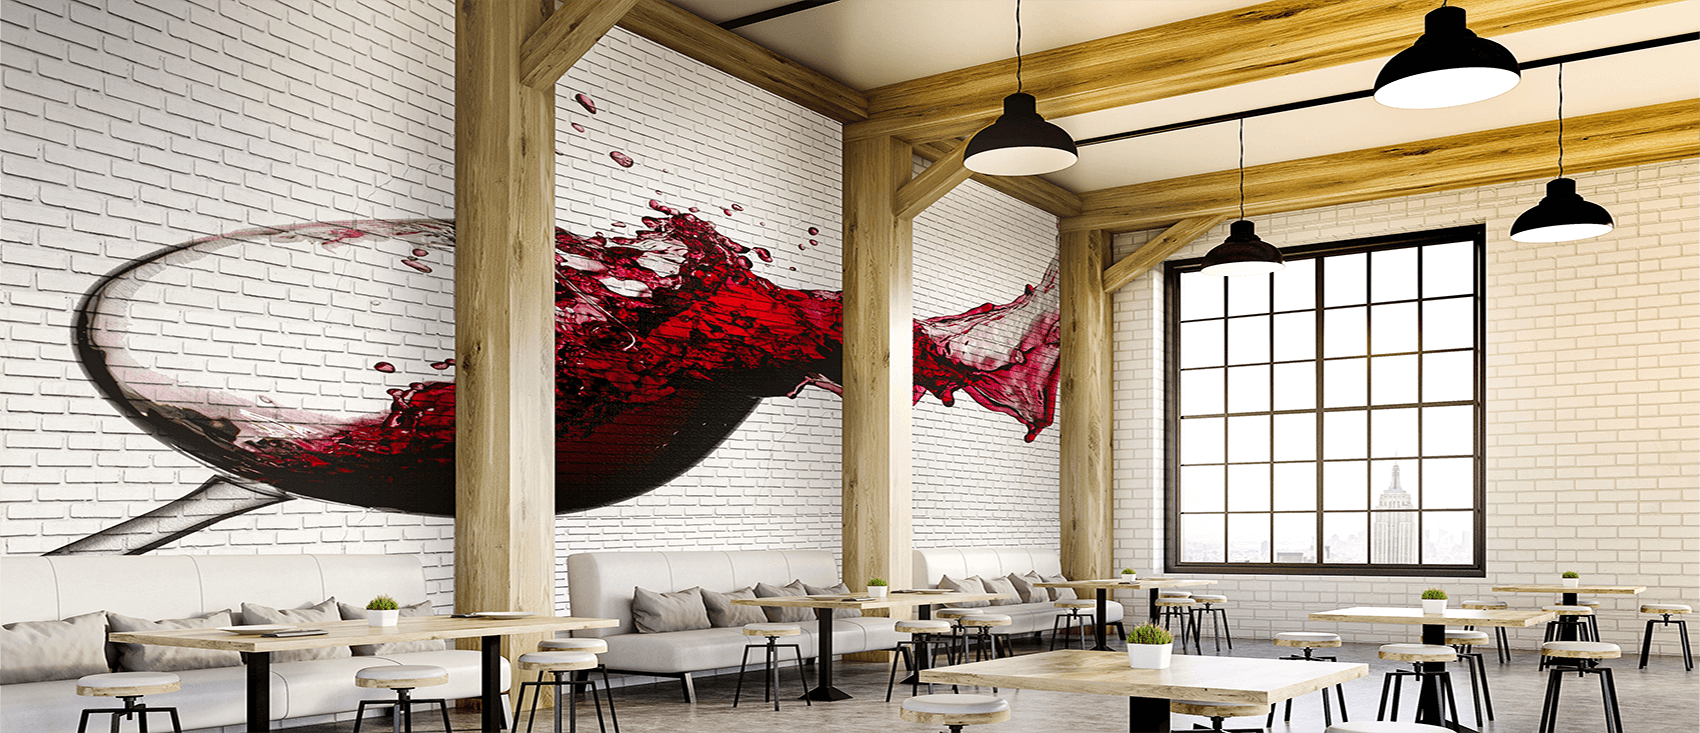 Red wine spilling decal on white brick wall in restaurant. 